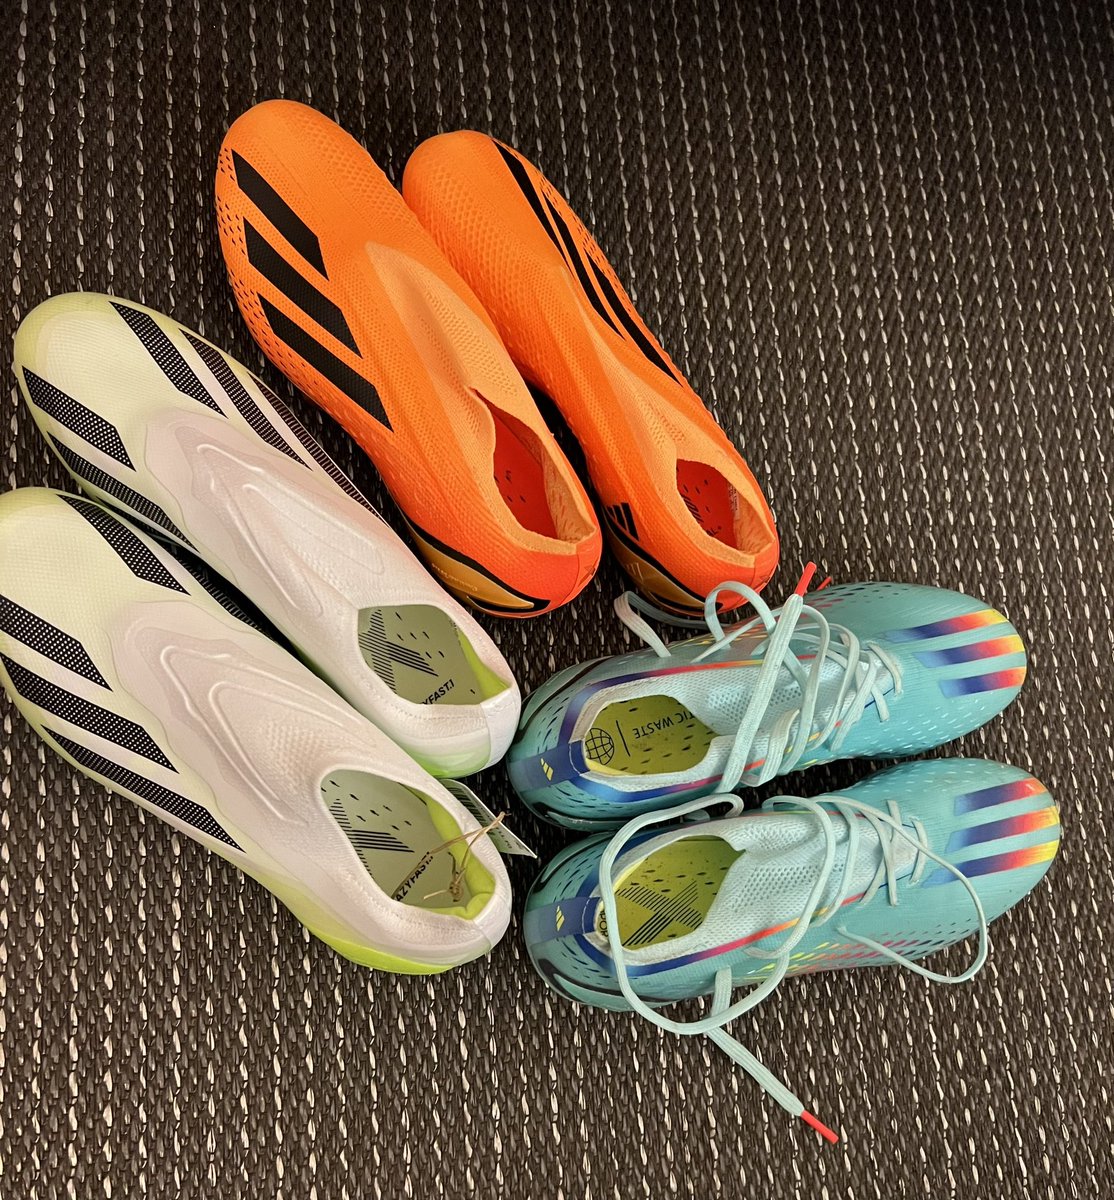 GIVEAWAY ALERT 🚨 
As we continue to build up from our journey to #Paris2024olympics. Have see all the support from our fans across the world. Me and my teammates appreciate your support. I’m giving away these pairs of cleats to fans at the stadium tomorrow. Don’t miss out.